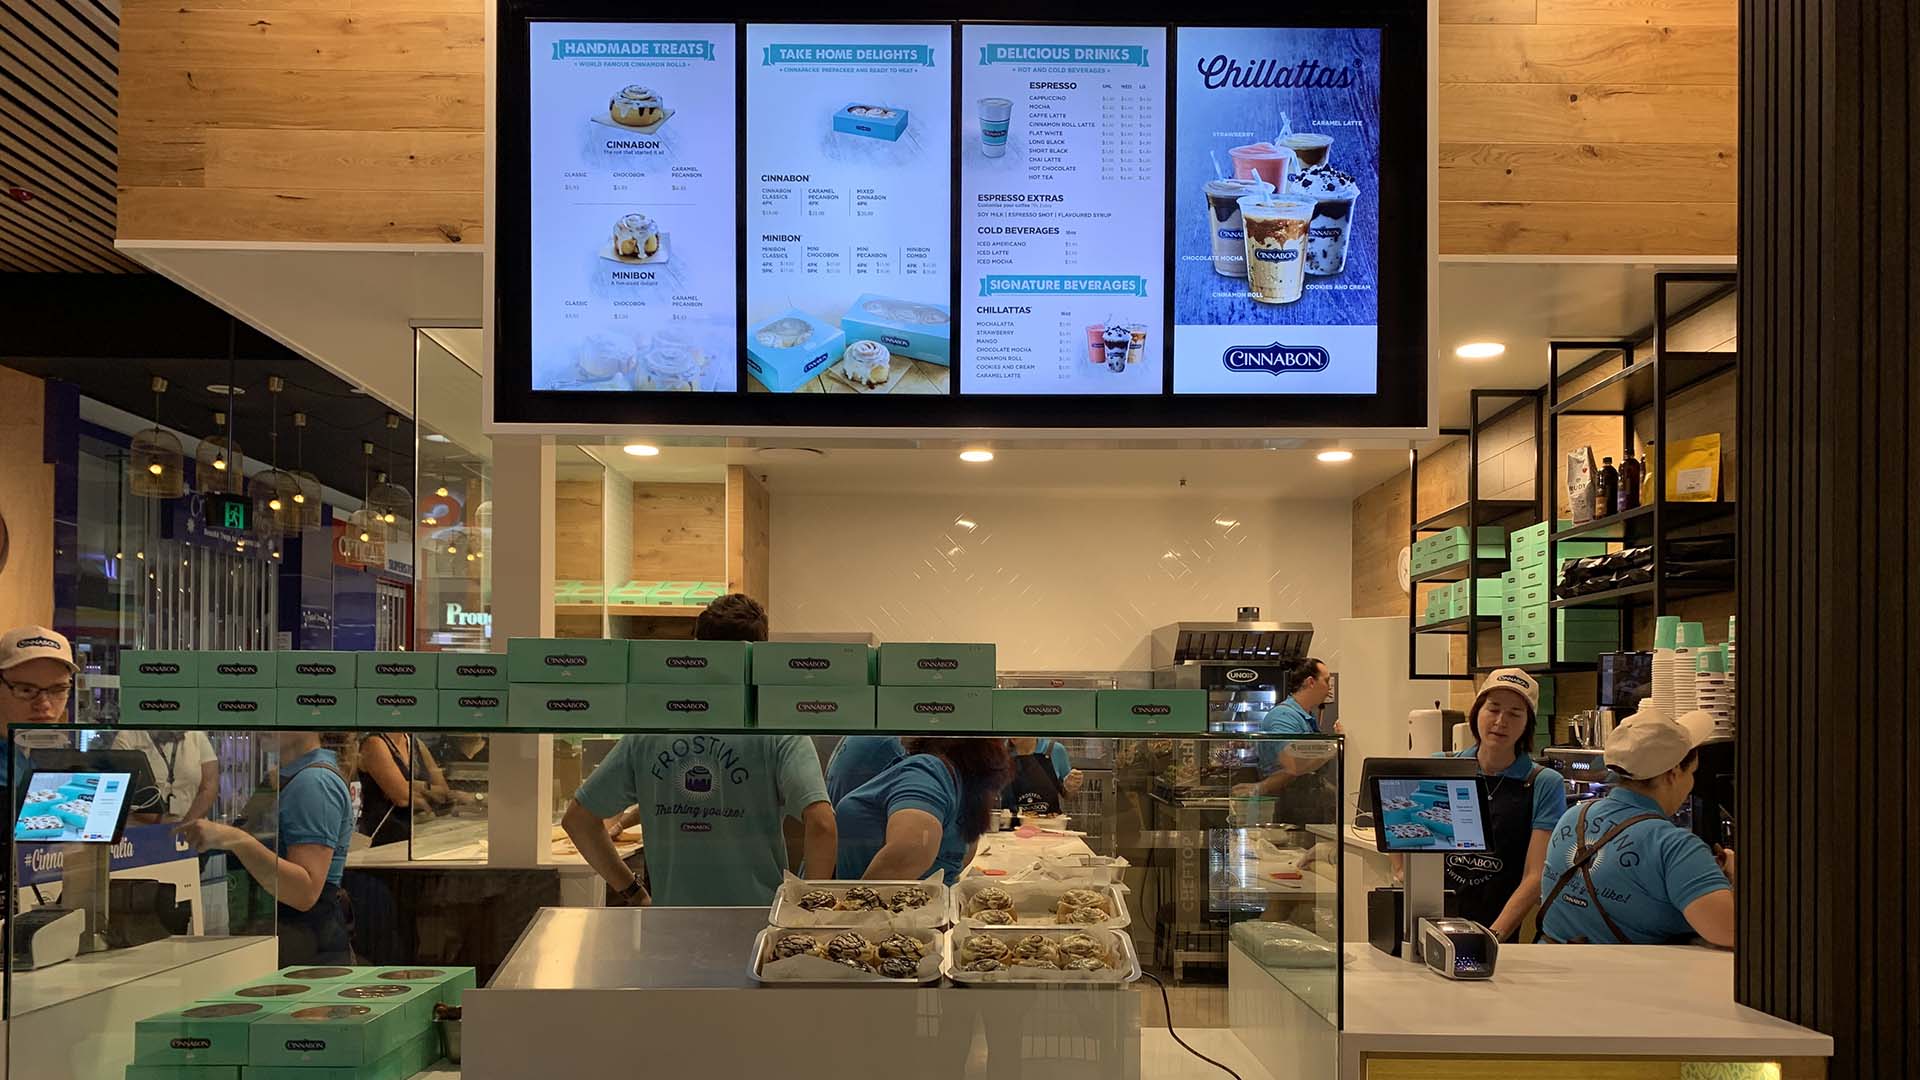 US Bakery Chain Cinnabon Is About to Open Its Second Aussie Store in Brisbane